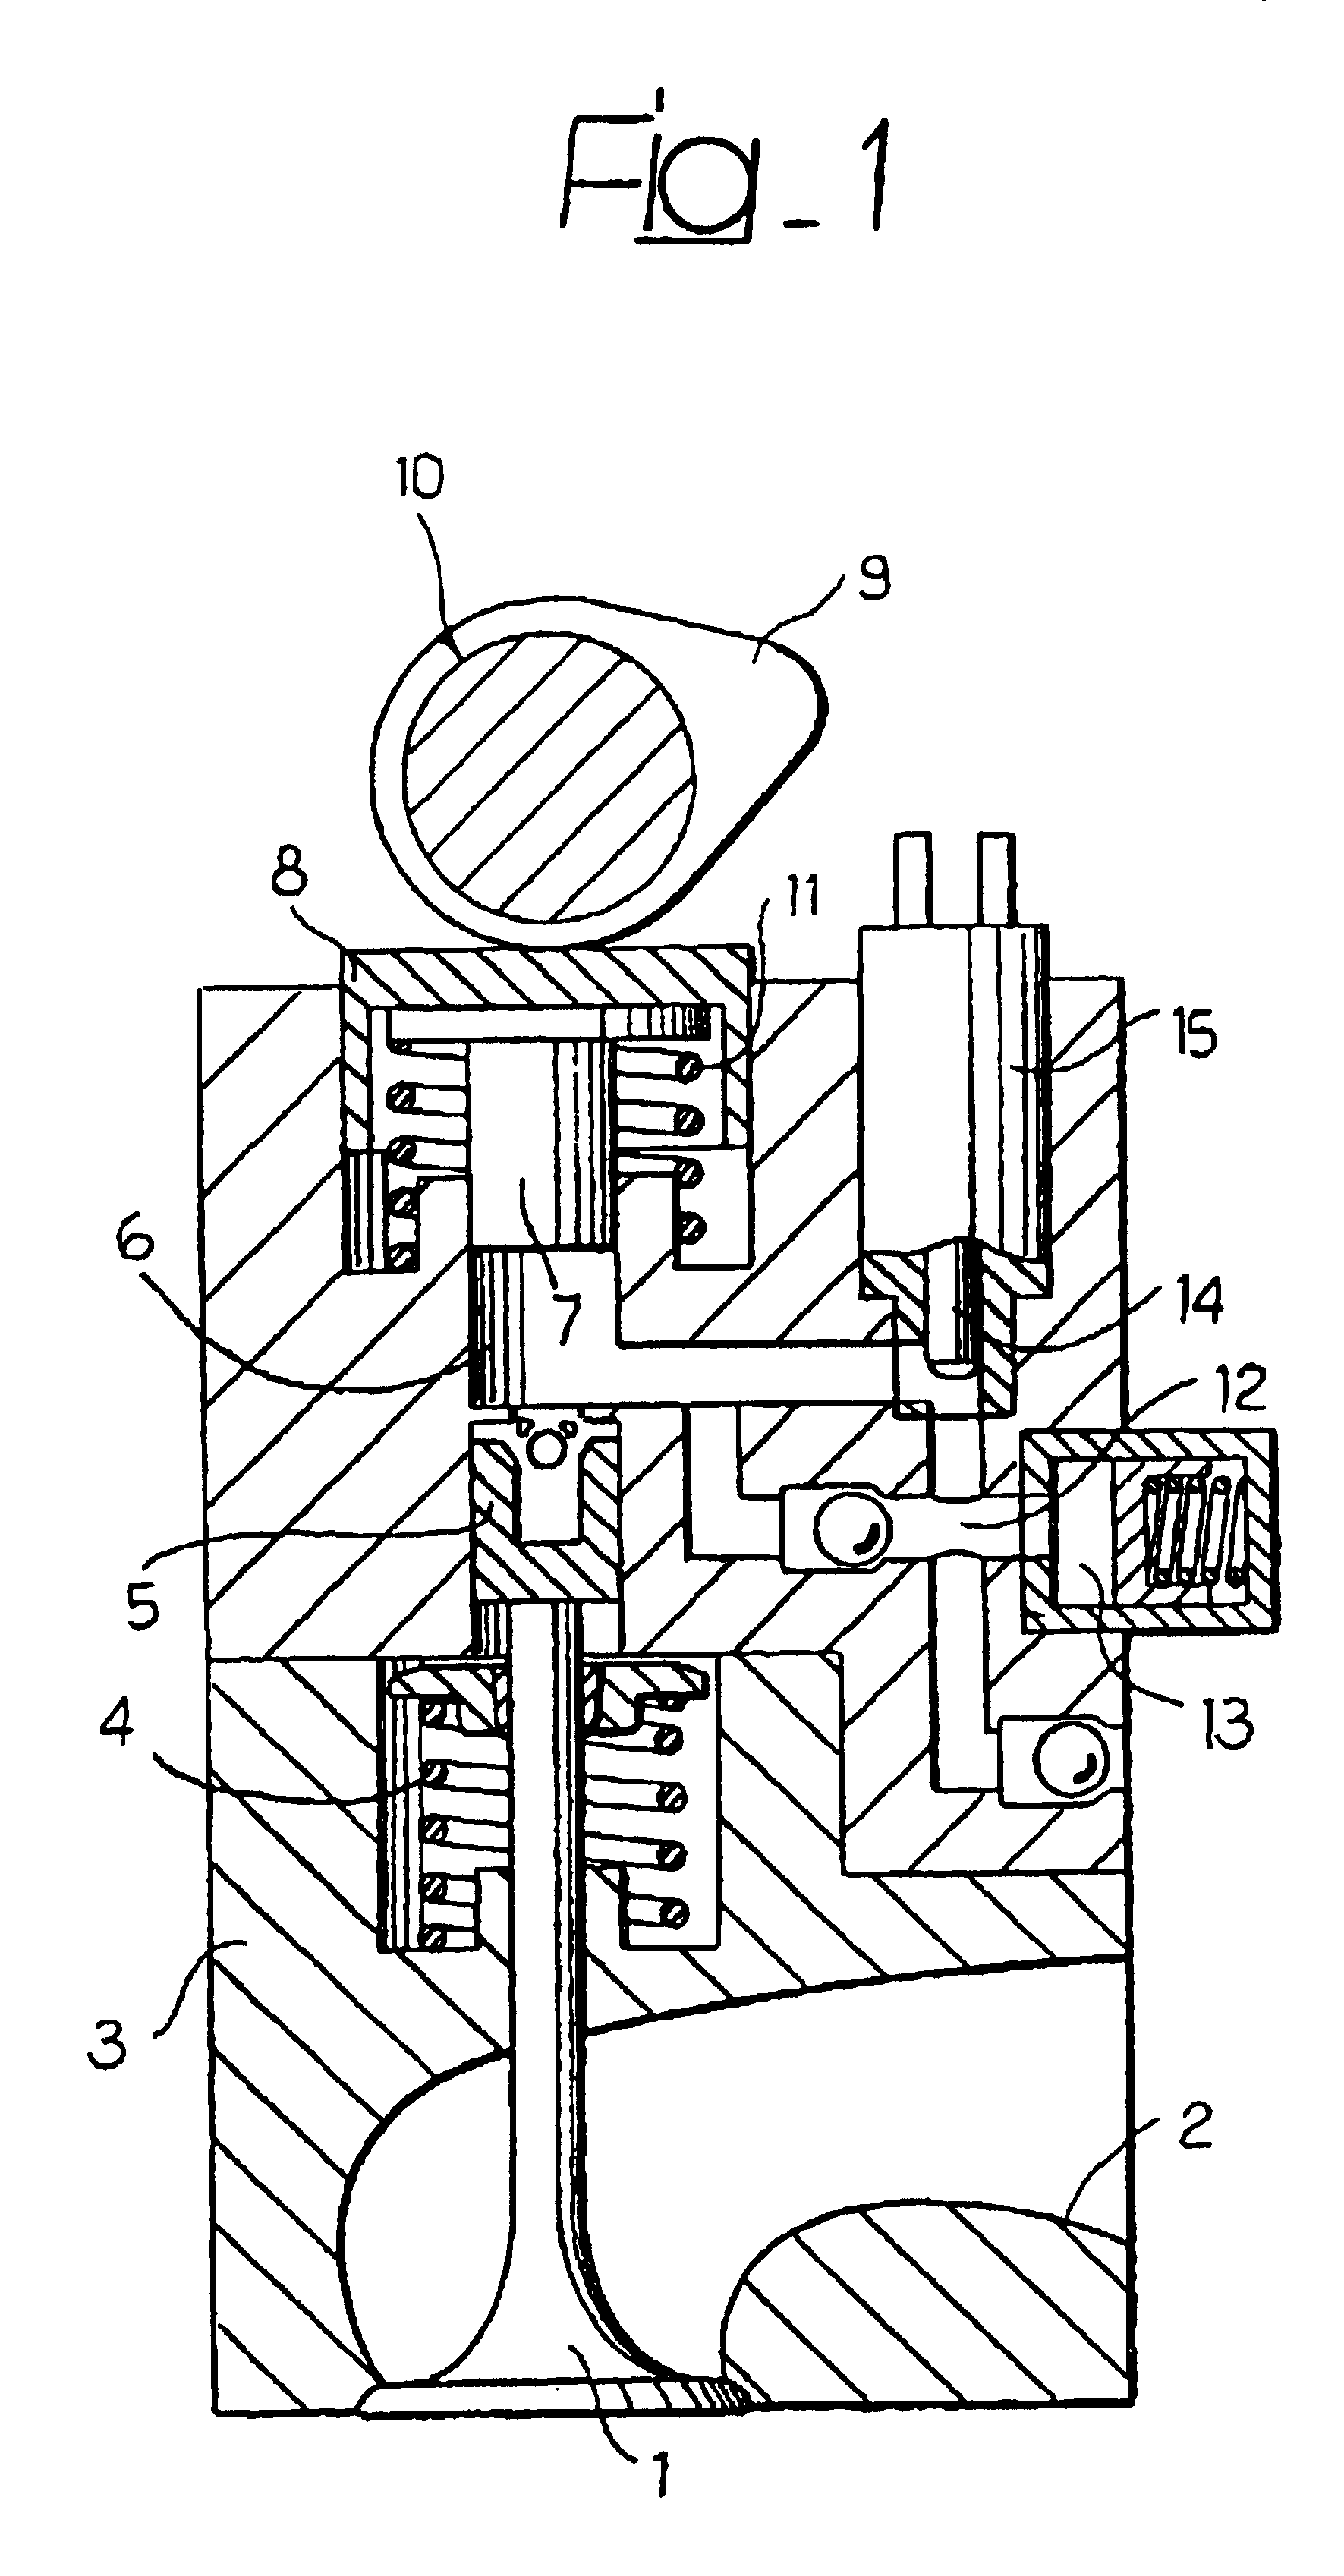 Multi-cylinder diesel engine with variably actuated valves